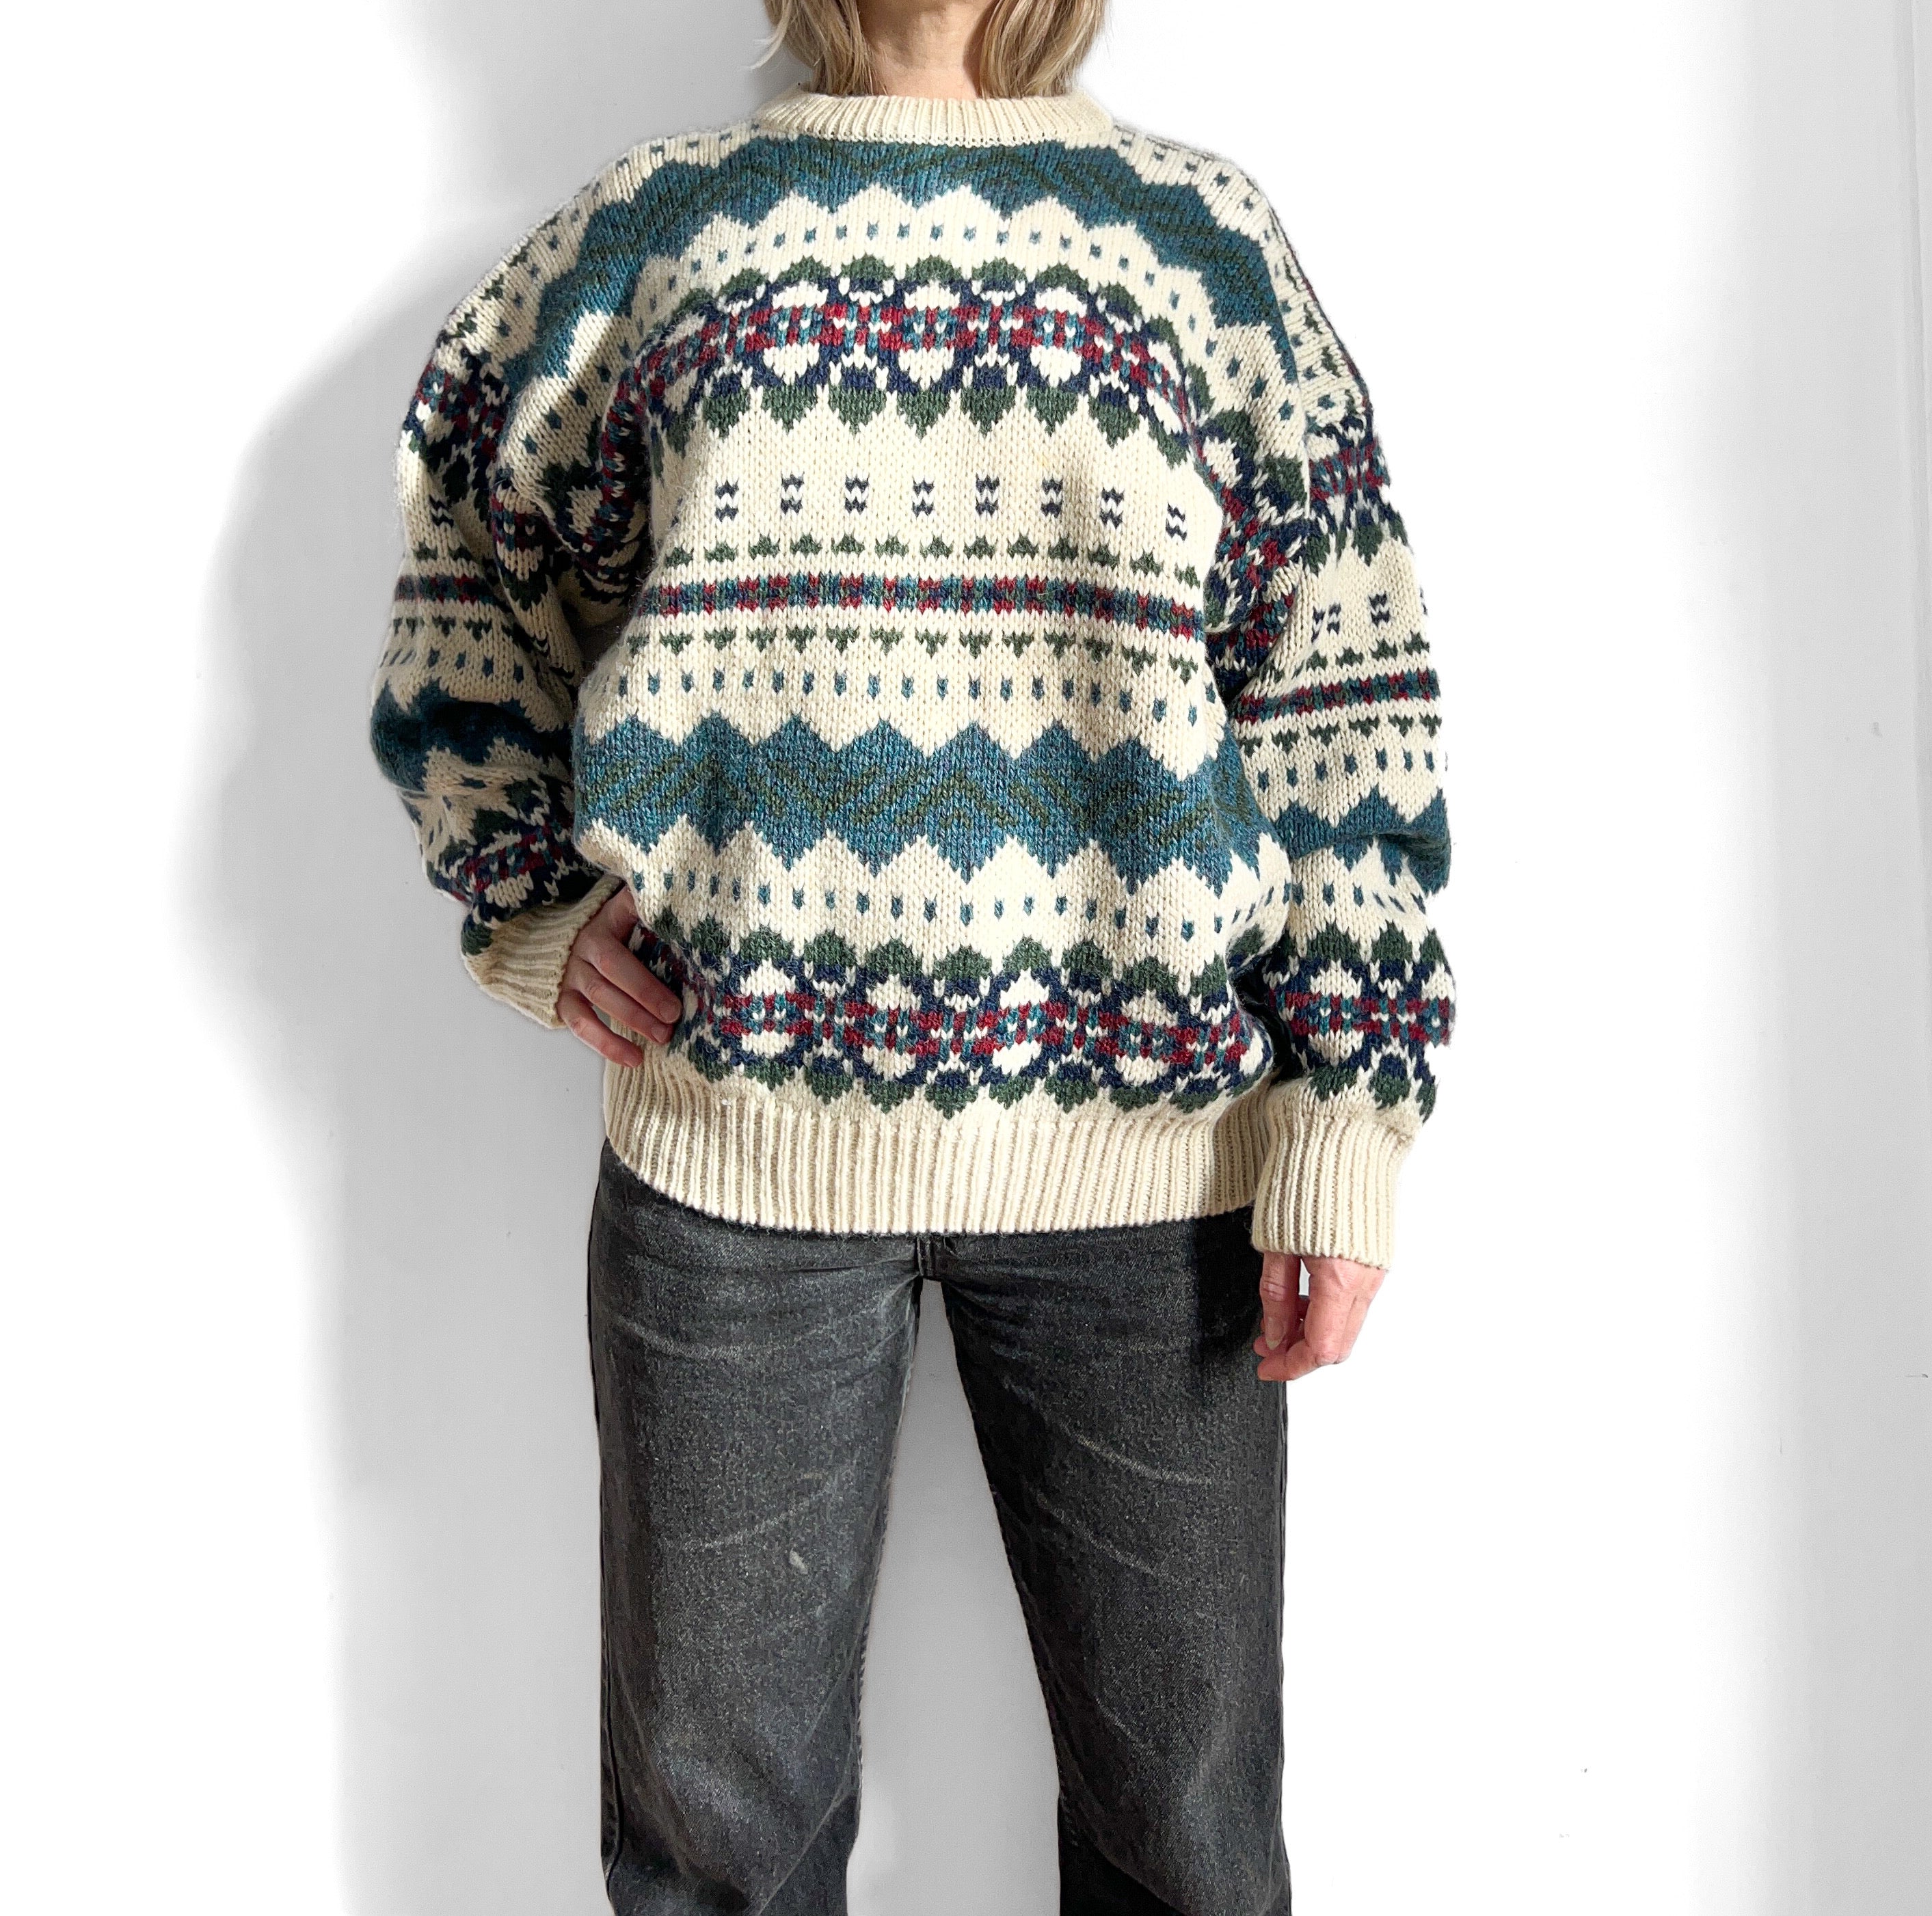 90s Chunky Knit Extra Large Wool Sweater, Oversize XL Nordic Pattern Knit